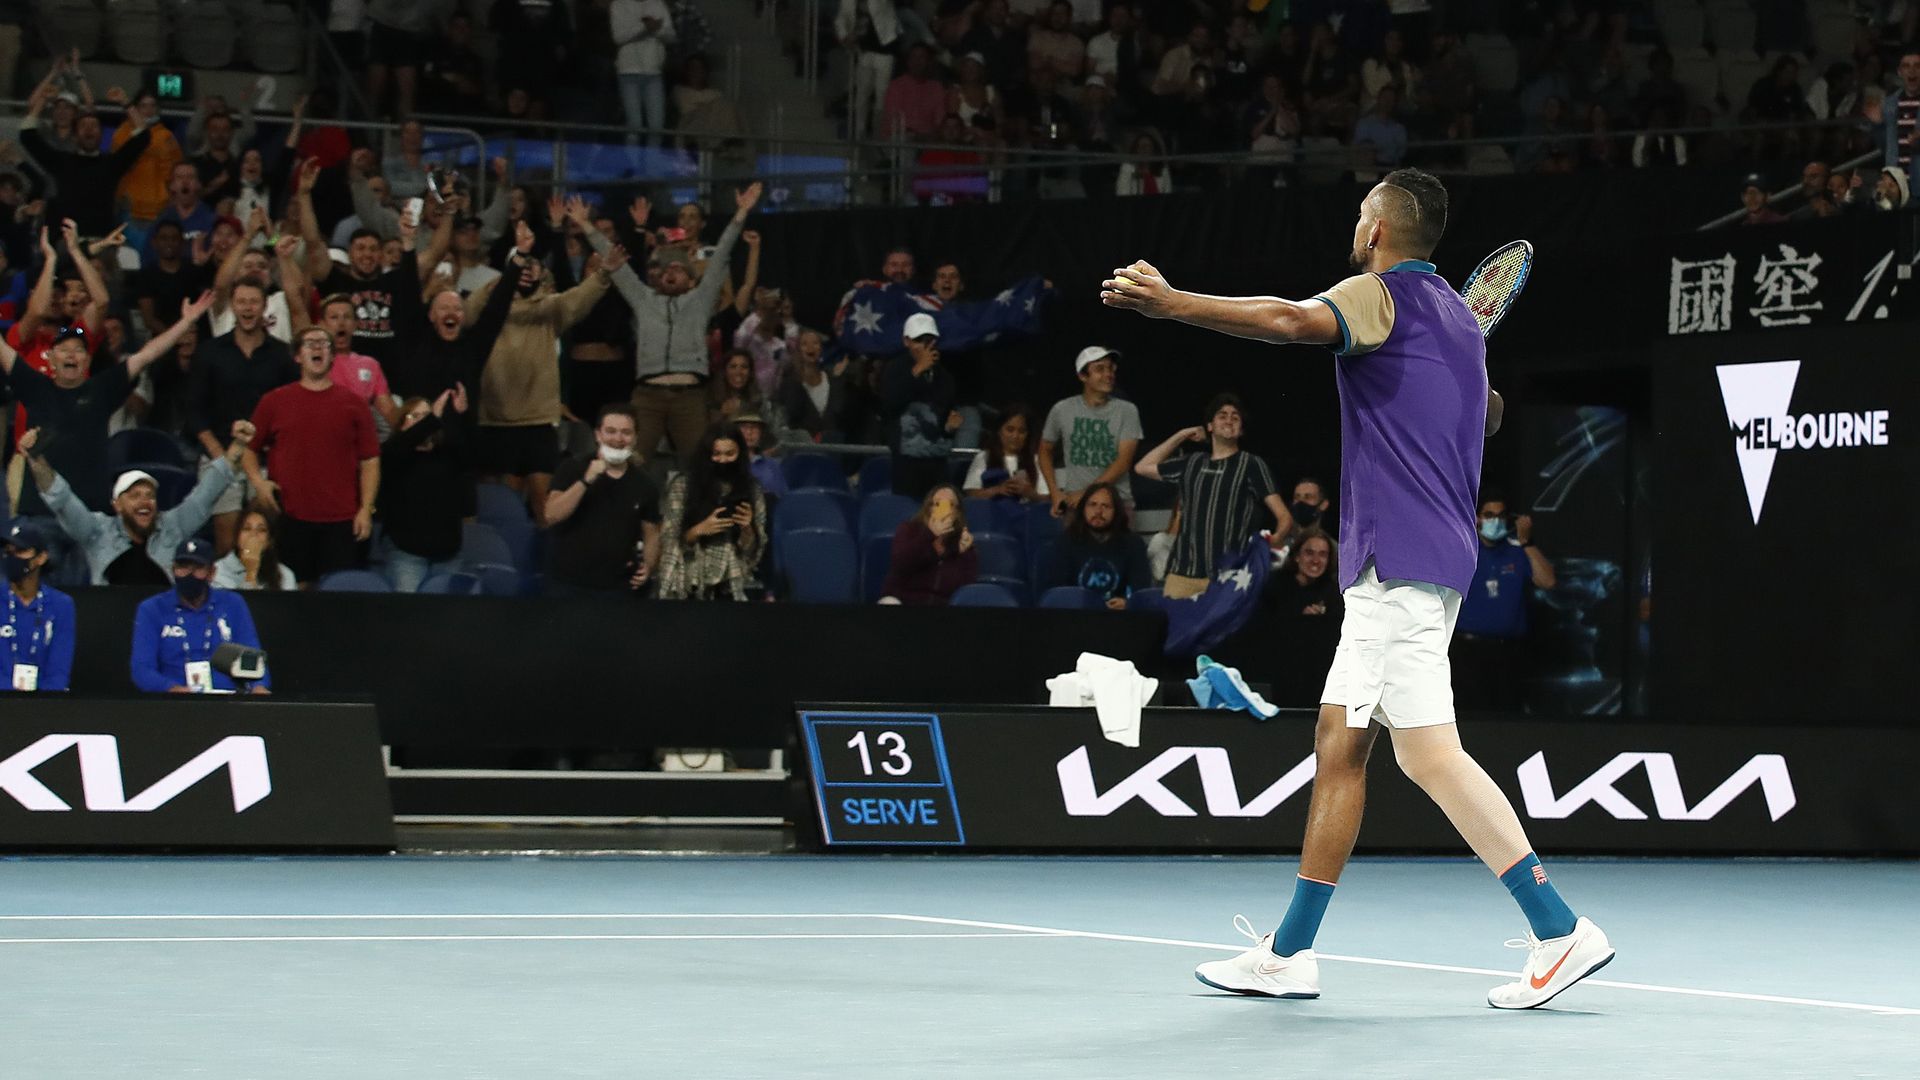 Nick Kyrgios pumps up the crowd.